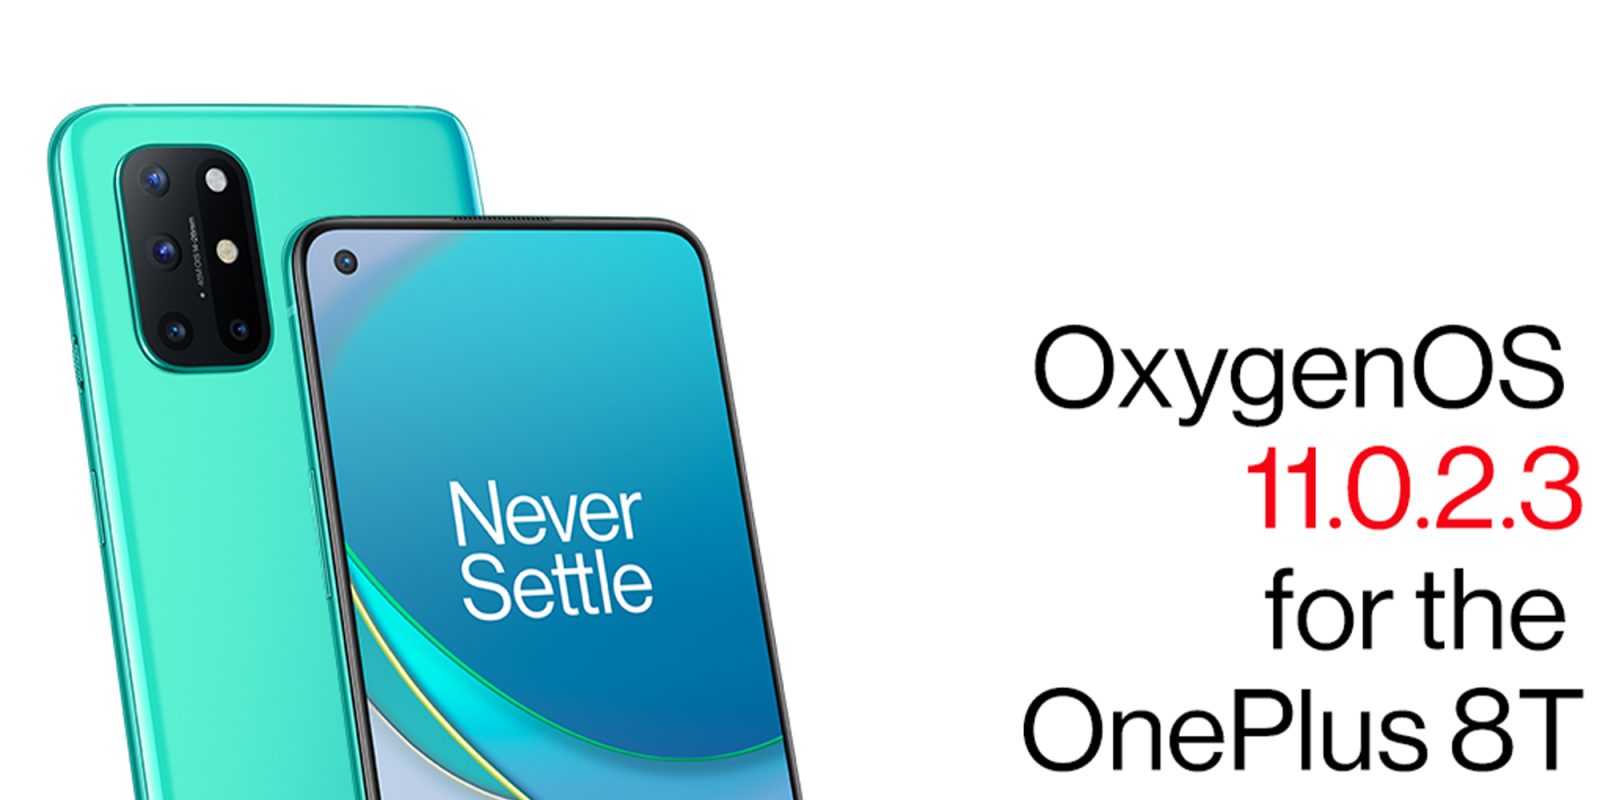 OxygenOS 11.0.2.3 for OnePlus 8T